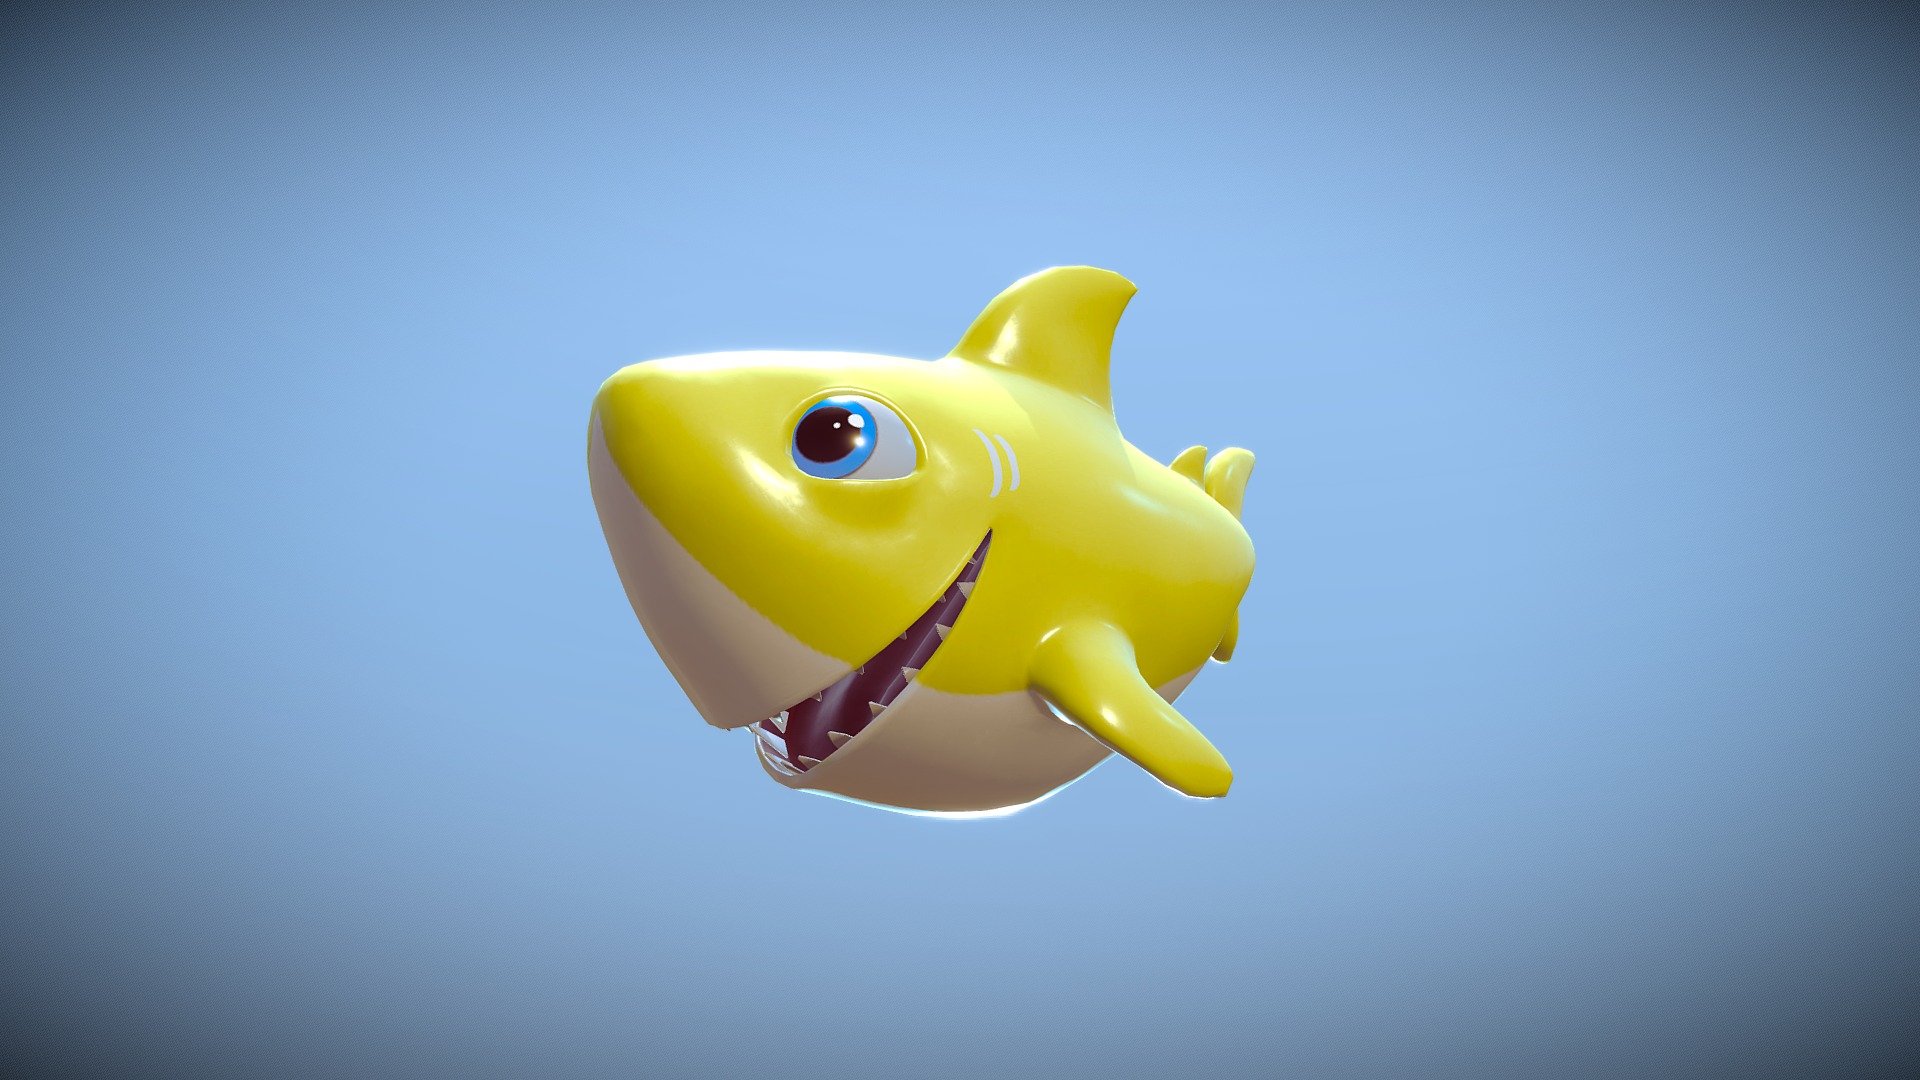 unused  Baby Shark animations created for Pinkfong for an Augmented Reality wall decal.
There is a slight pause between each animation 3d model